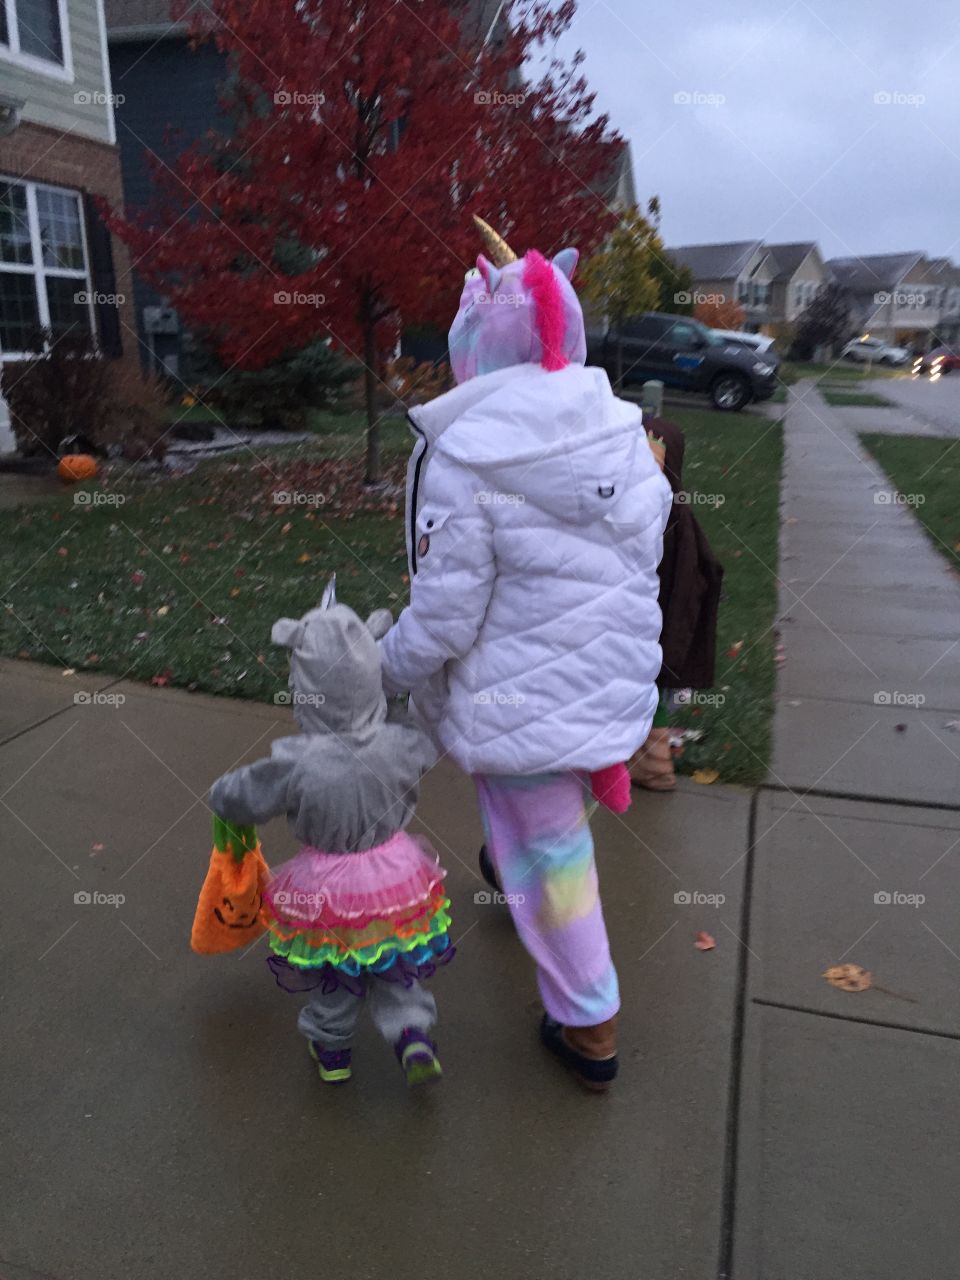 Rhino and unicorn buddies out trick or treating on a frigid Halloween night in the Midwest 